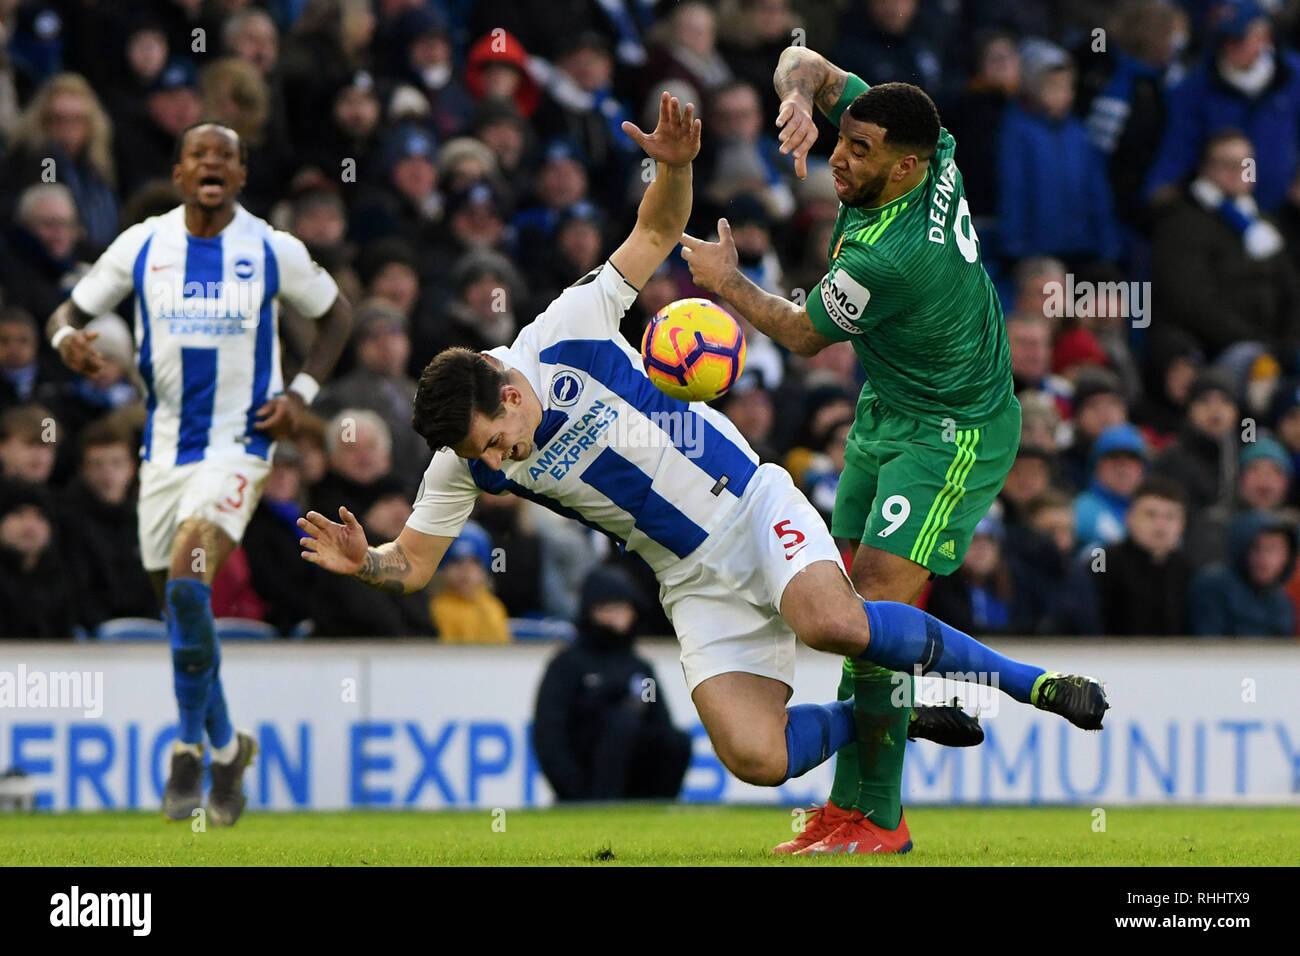 Troy Deeney of Watford and Lewis Dunk of Brighton & Hove Albion battle for the ball - Brighton & Hove Albion v Watford, Premier League, Amex Stadium, Brighton - 2nd February 2019  Editorial Use Only - DataCo restrictions apply Stock Photo